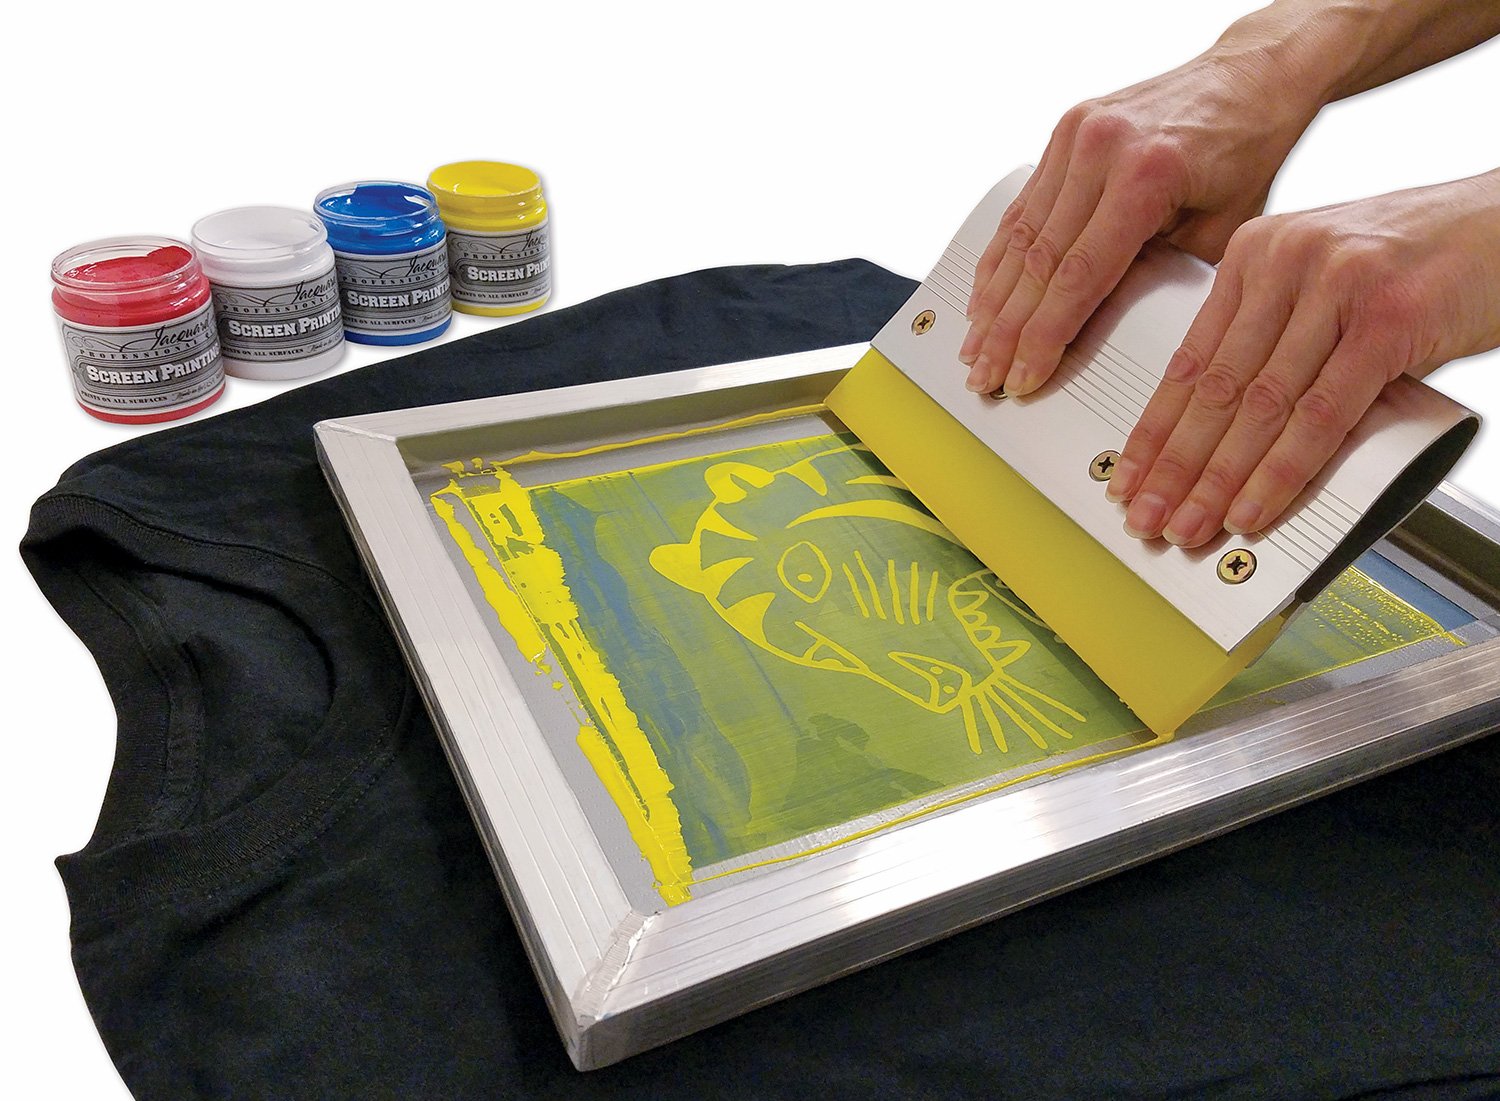 Applications and Process of Silk Screen Printing on Shirts